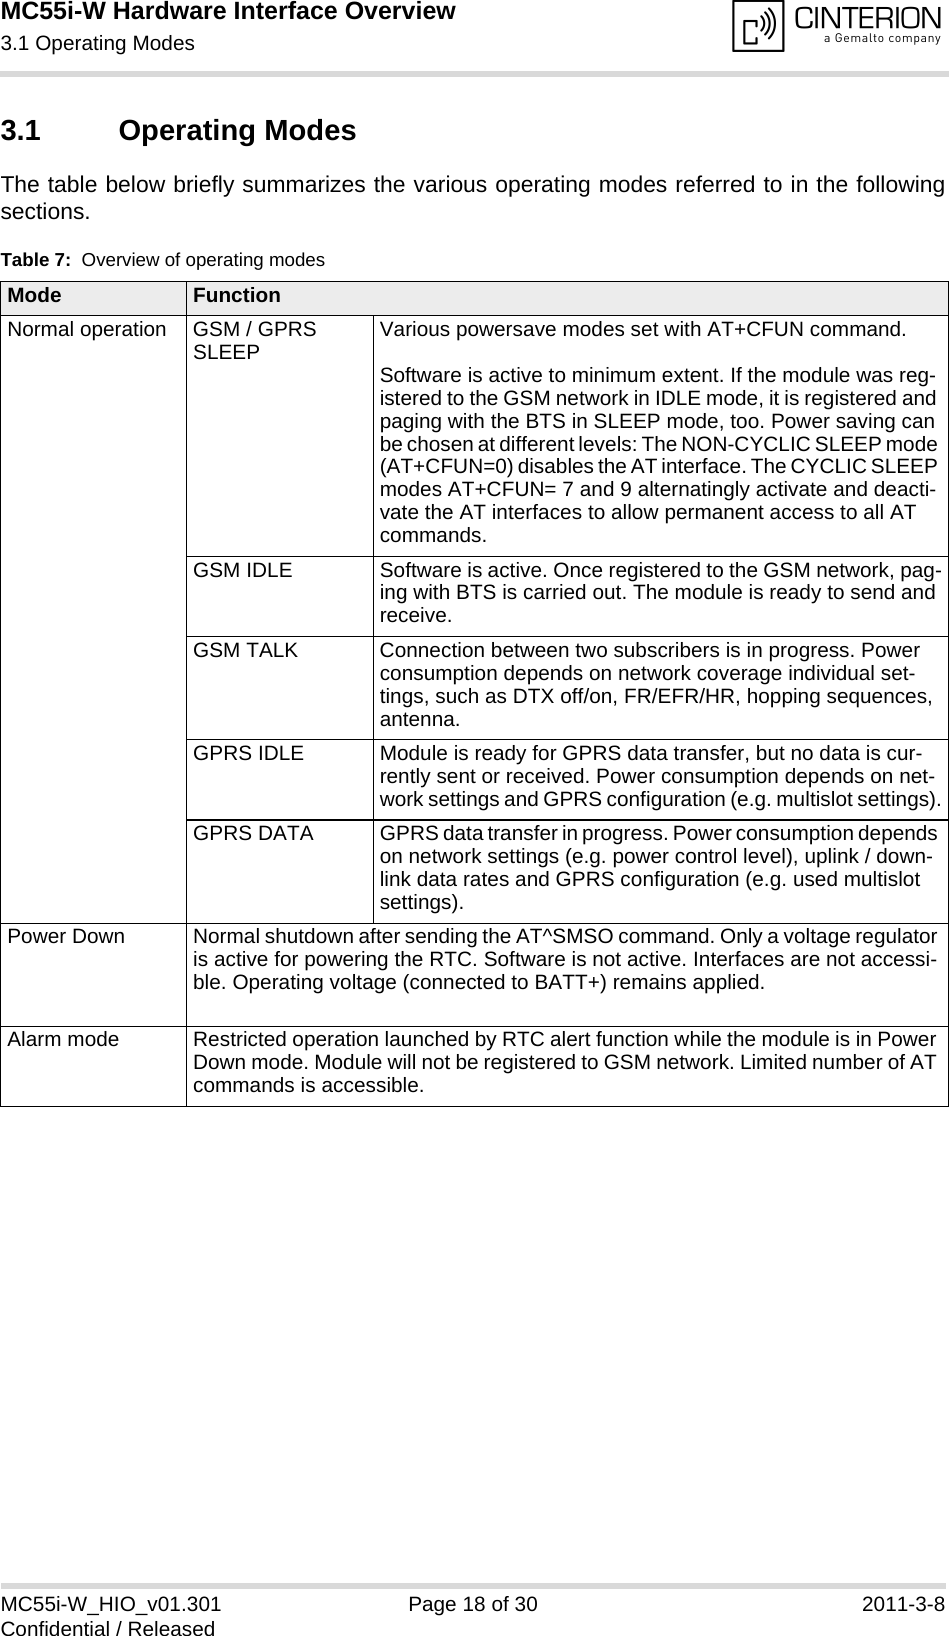 MC55i-W Hardware Interface Overview3.1 Operating Modes18MC55i-W_HIO_v01.301 Page 18 of 30 2011-3-8Confidential / Released3.1 Operating ModesThe table below briefly summarizes the various operating modes referred to in the followingsections. Table 7:  Overview of operating modesMode FunctionNormal operation GSM / GPRS SLEEP Various powersave modes set with AT+CFUN command. Software is active to minimum extent. If the module was reg-istered to the GSM network in IDLE mode, it is registered and paging with the BTS in SLEEP mode, too. Power saving can be chosen at different levels: The NON-CYCLIC SLEEP mode (AT+CFUN=0) disables the AT interface. The CYCLIC SLEEP modes AT+CFUN= 7 and 9 alternatingly activate and deacti-vate the AT interfaces to allow permanent access to all AT commands.GSM IDLE Software is active. Once registered to the GSM network, pag-ing with BTS is carried out. The module is ready to send and receive.GSM TALK Connection between two subscribers is in progress. Power consumption depends on network coverage individual set-tings, such as DTX off/on, FR/EFR/HR, hopping sequences, antenna.GPRS IDLE Module is ready for GPRS data transfer, but no data is cur-rently sent or received. Power consumption depends on net-work settings and GPRS configuration (e.g. multislot settings).GPRS DATA GPRS data transfer in progress. Power consumption depends on network settings (e.g. power control level), uplink / down-link data rates and GPRS configuration (e.g. used multislot settings).Power Down Normal shutdown after sending the AT^SMSO command. Only a voltage regulator is active for powering the RTC. Software is not active. Interfaces are not accessi-ble. Operating voltage (connected to BATT+) remains applied.Alarm mode Restricted operation launched by RTC alert function while the module is in Power Down mode. Module will not be registered to GSM network. Limited number of AT commands is accessible. 